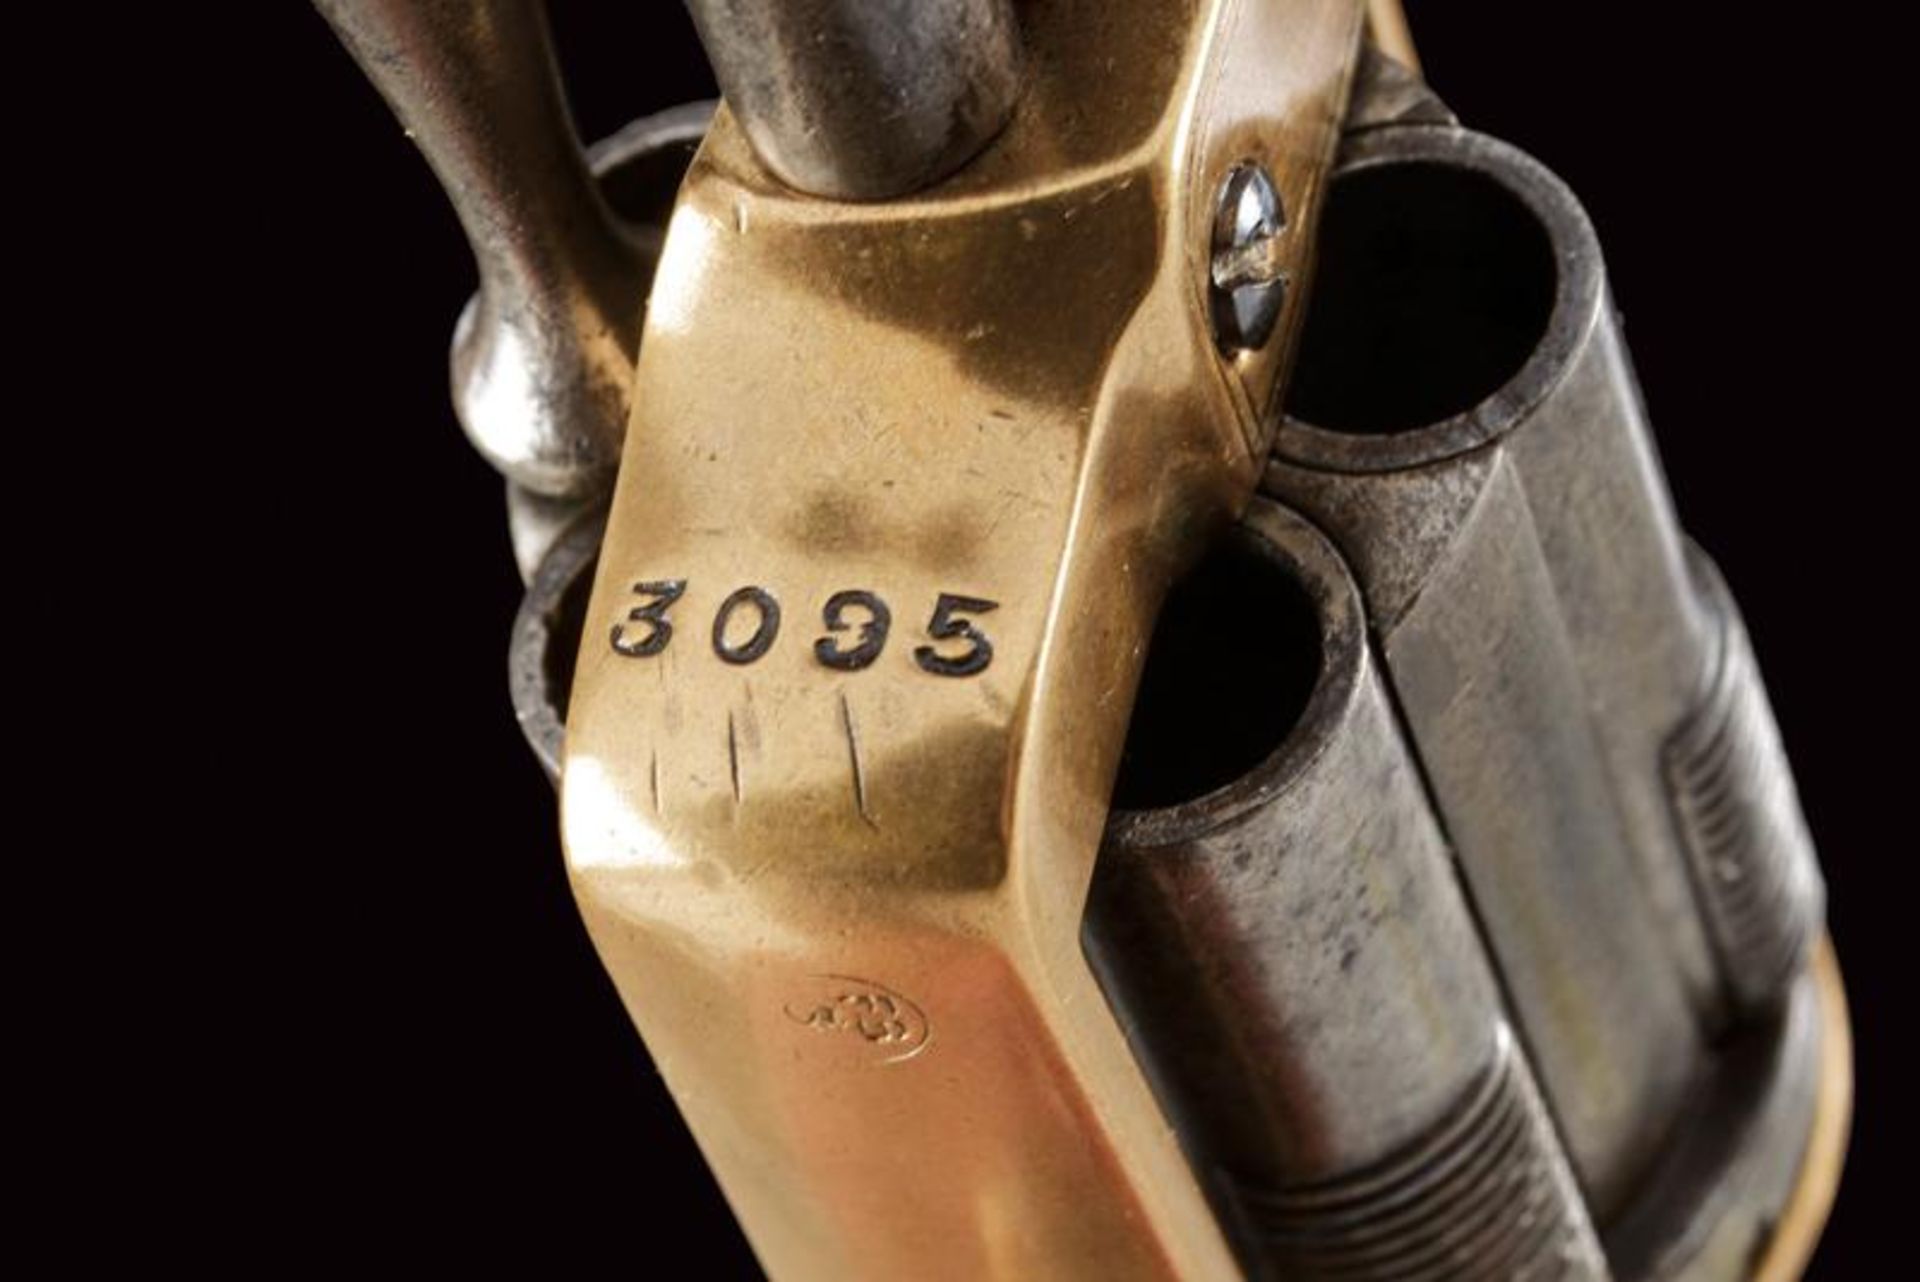 A Slocum Frontloading Pocket Revolver - Image 3 of 7